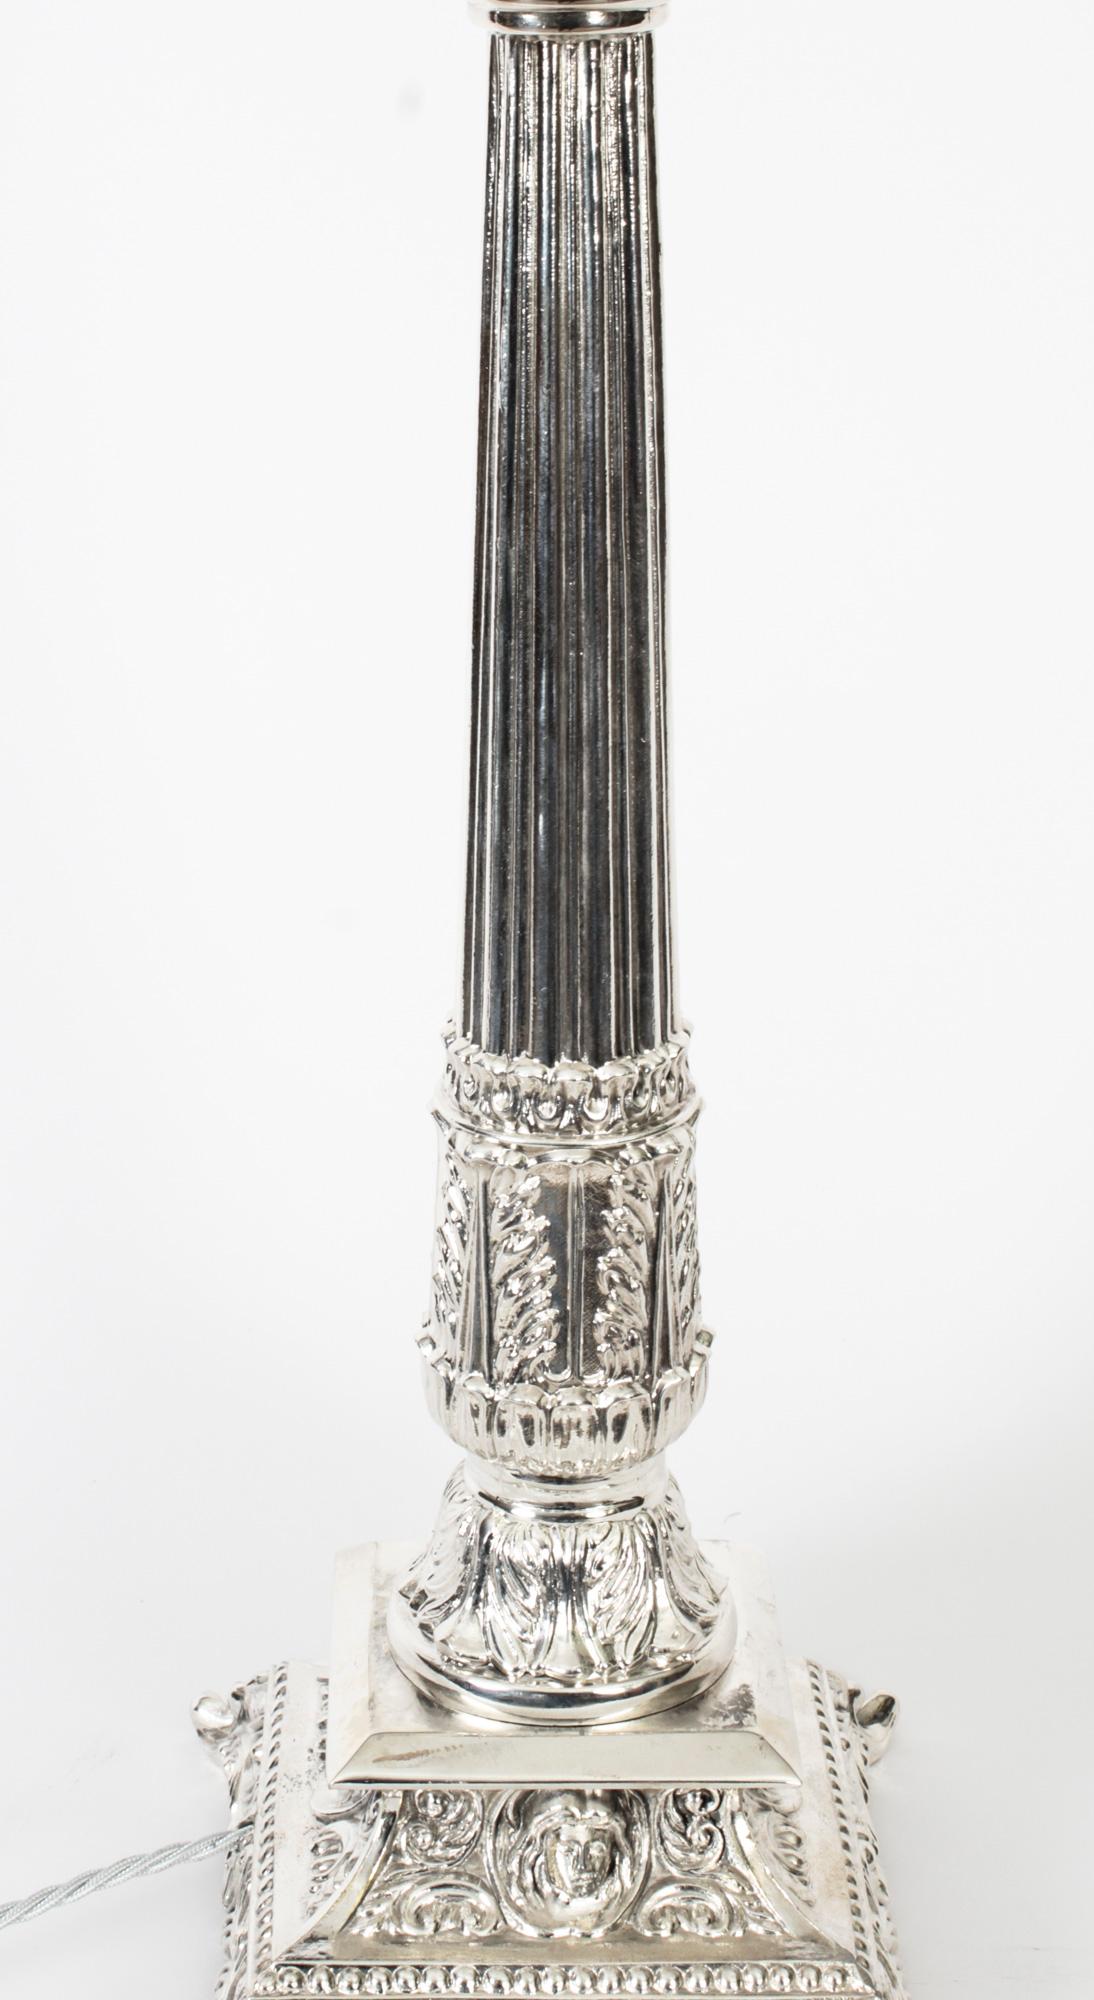 English Antique Victorian Silver Plated Doric Column Table Lamp, 19th Century For Sale